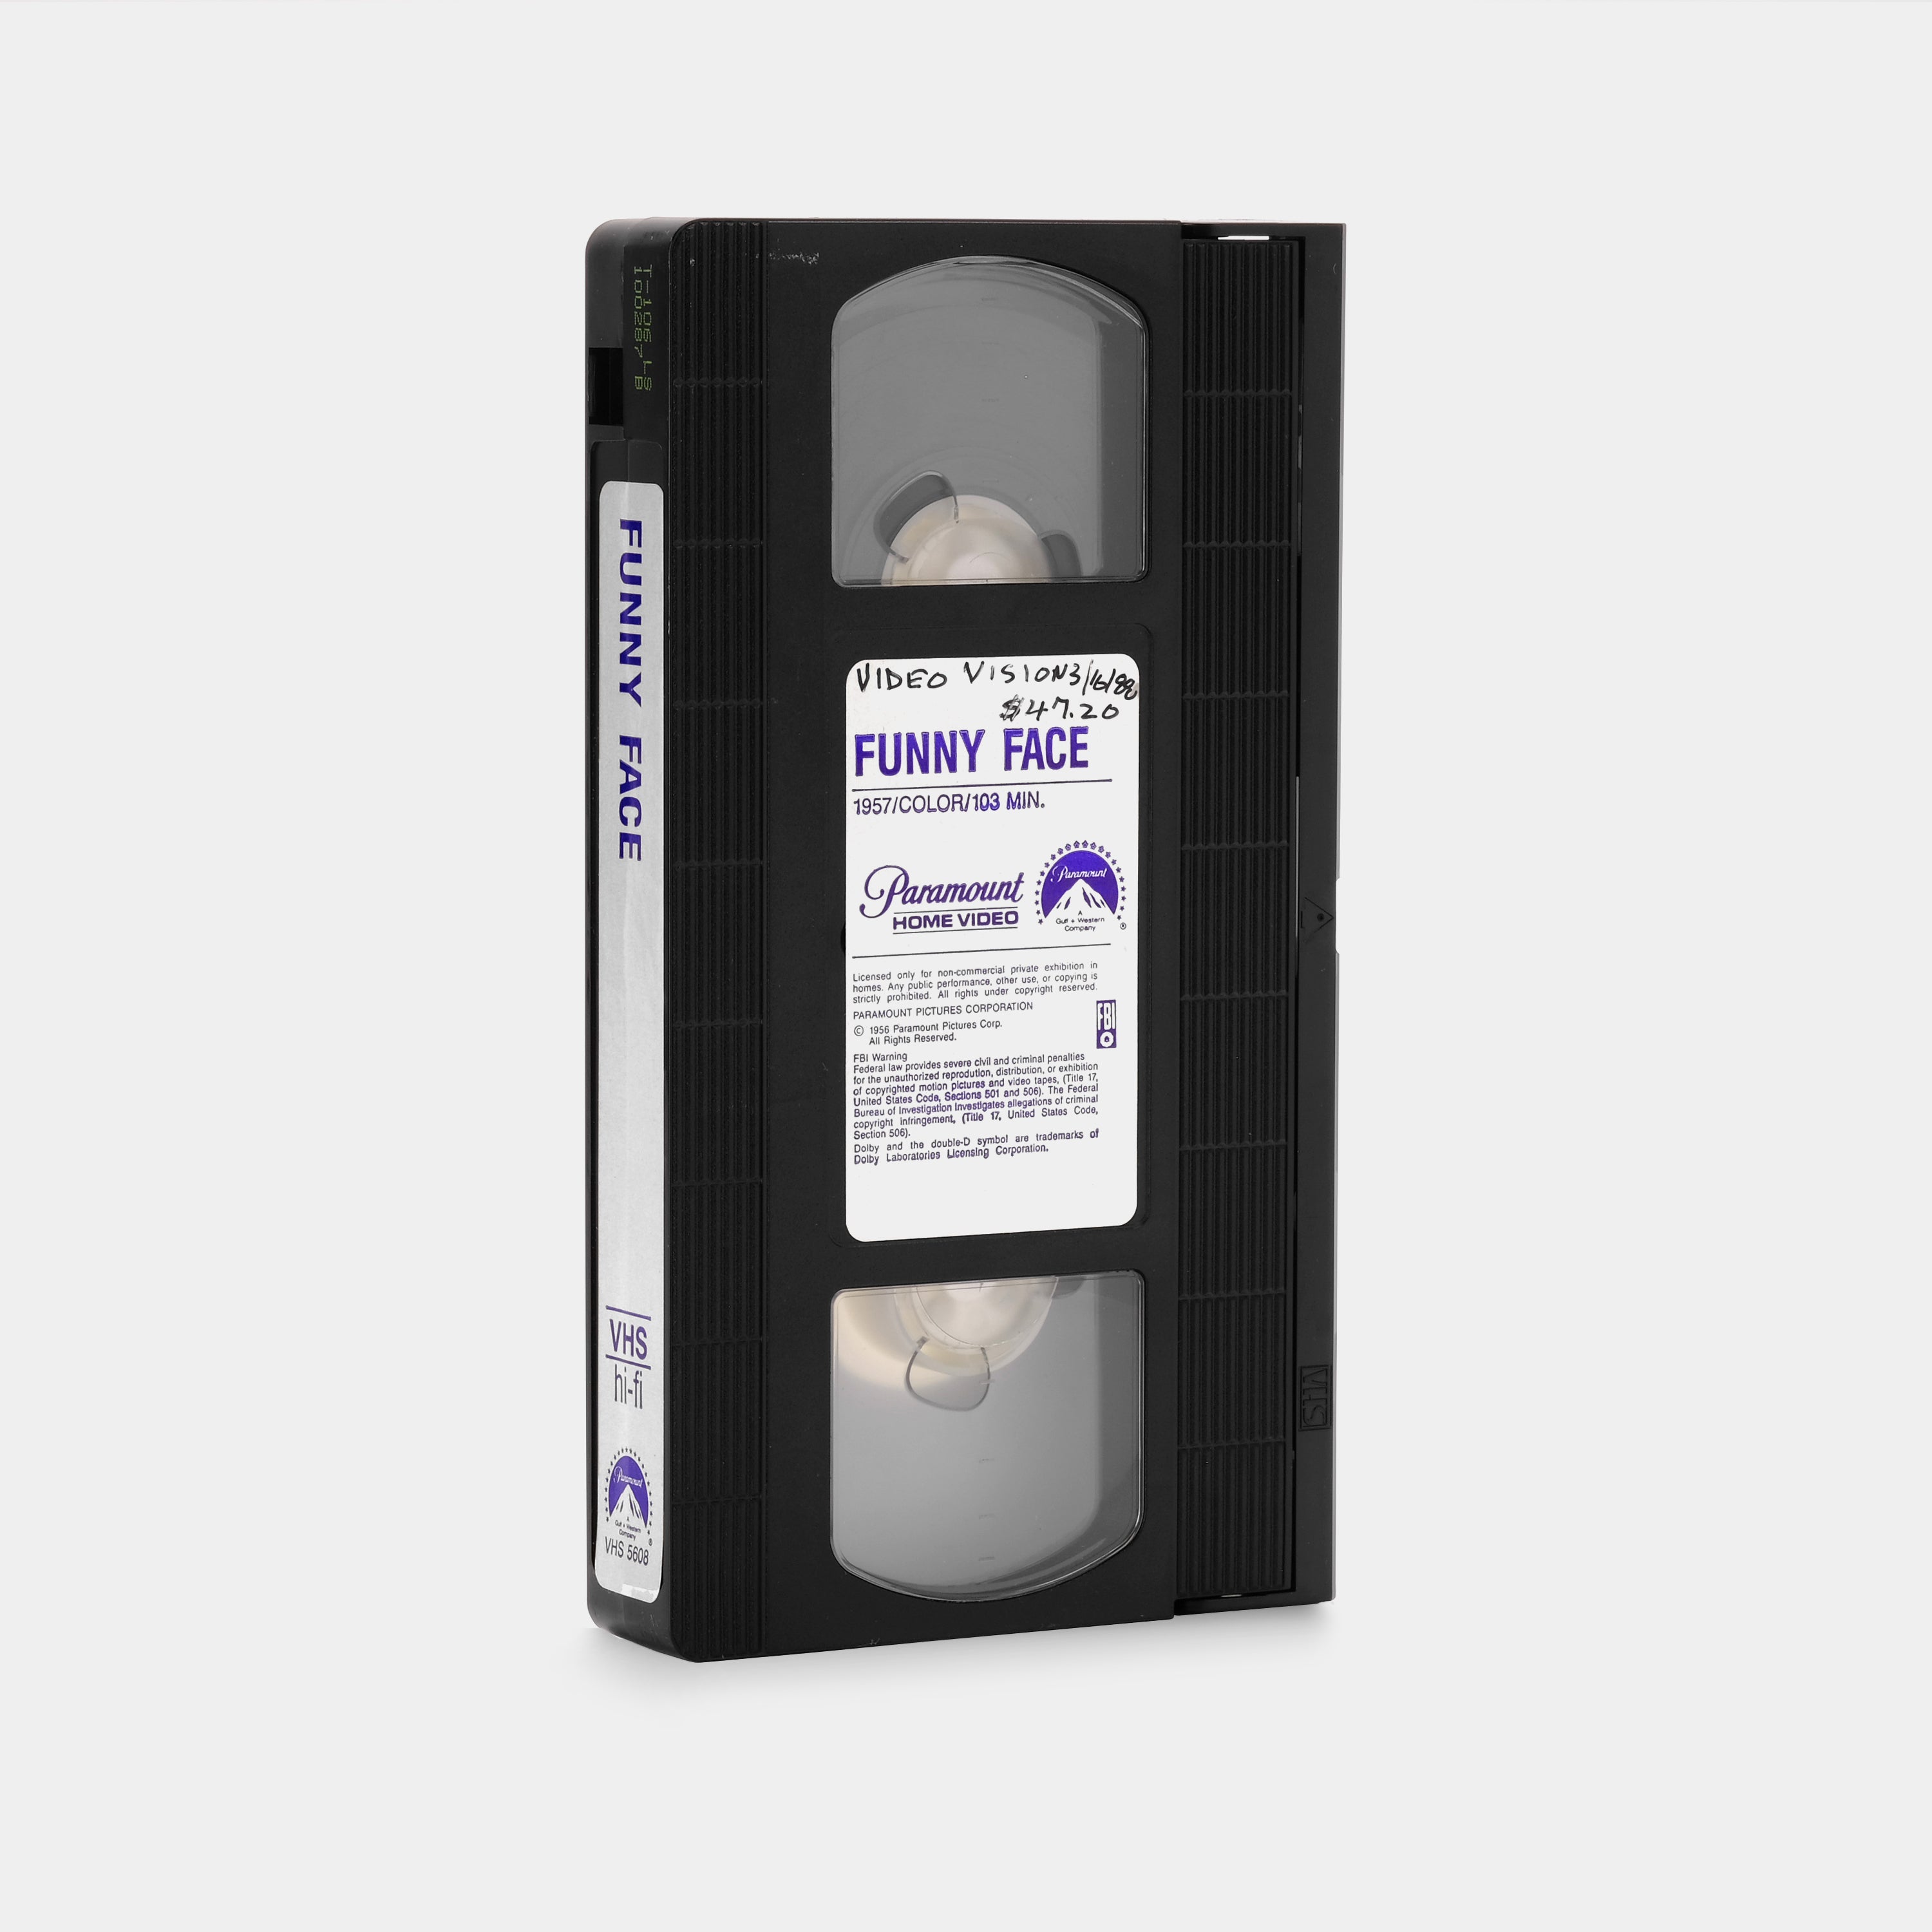 Funny Face VHS Tape